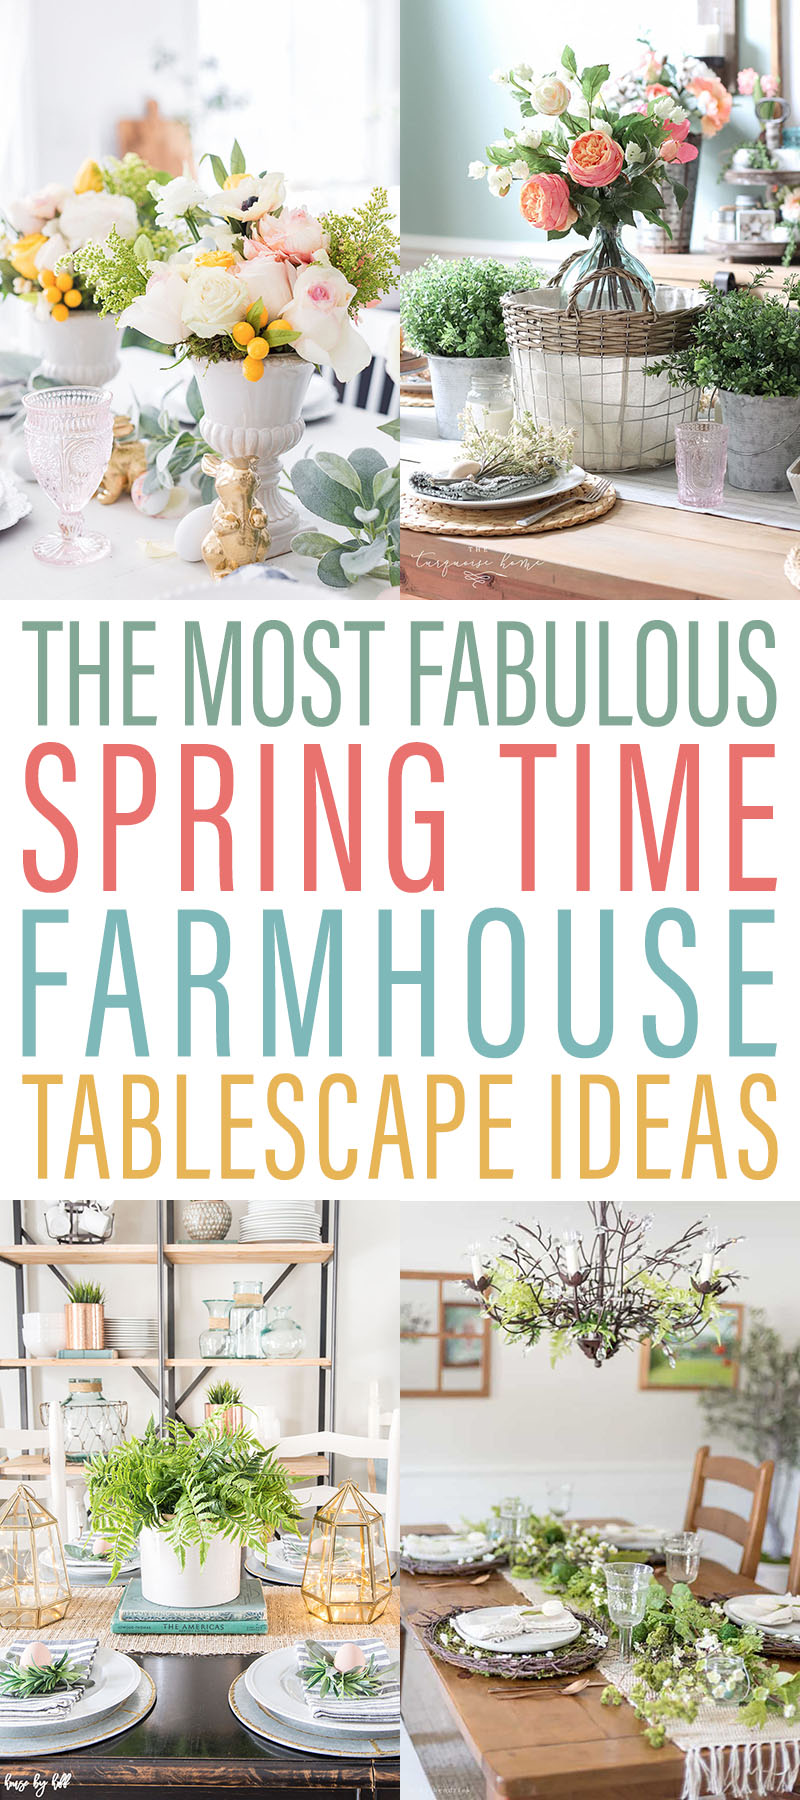 The Most Fabulous Spring Time Farmhouse Tablescape Ideas are waiting for you to check out and be inspired by! So many amazing creations for you to enjoy!